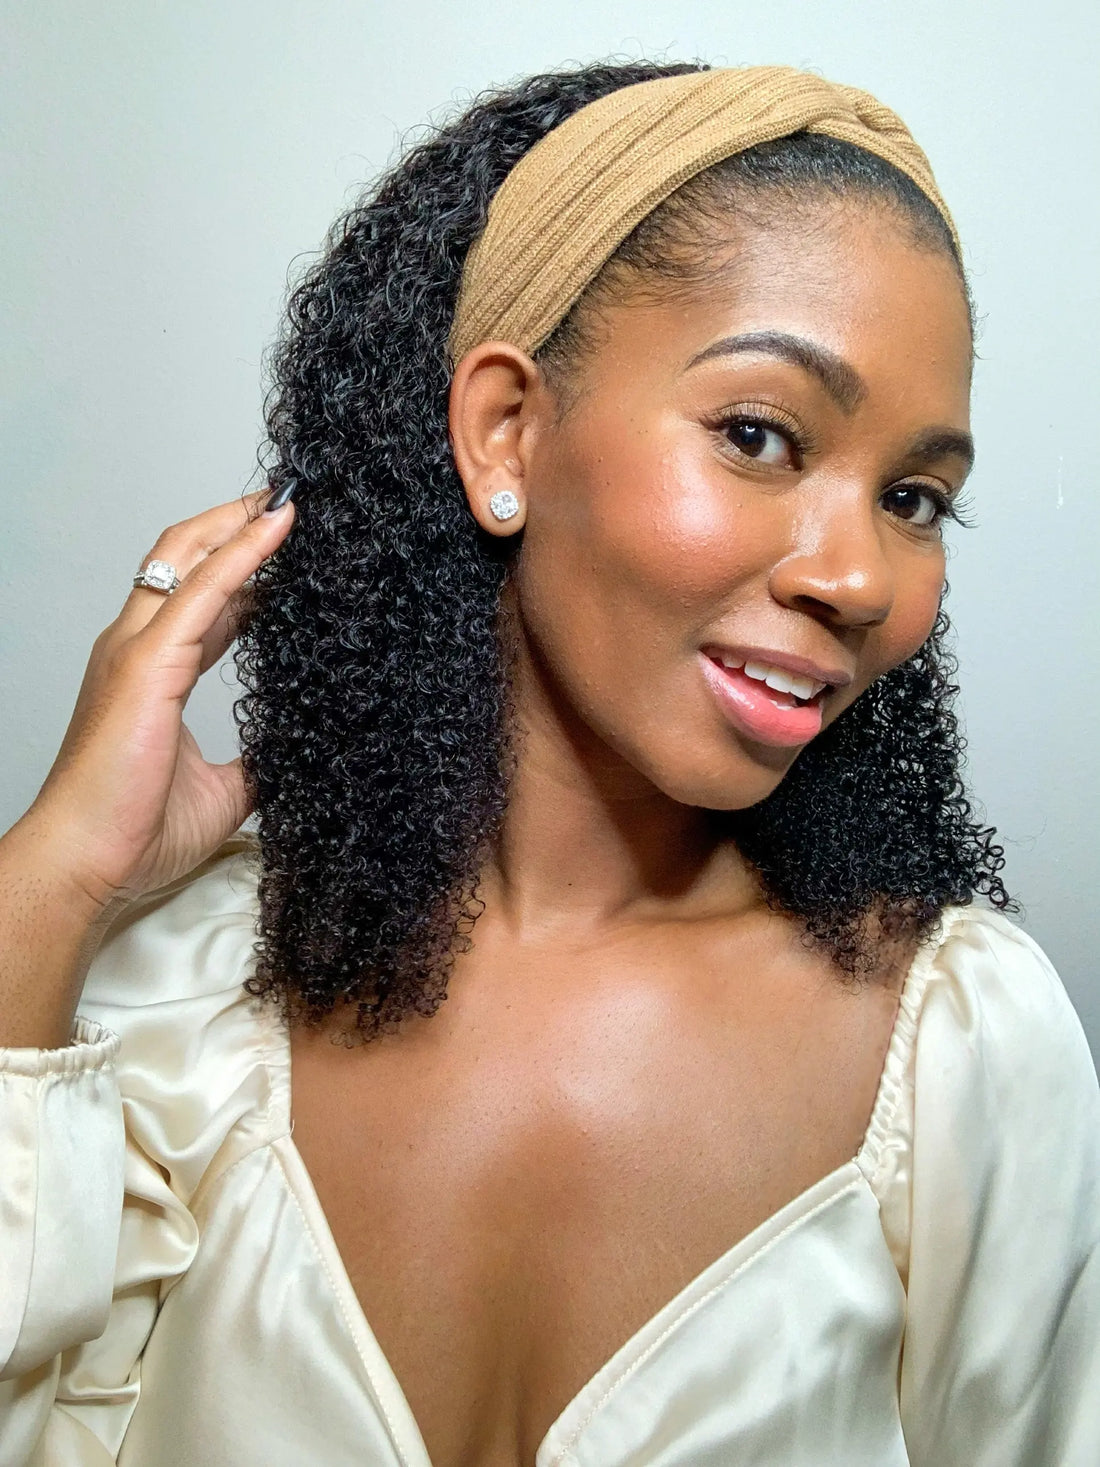 Jasmine Coil - Truly Easy Grab N Go Headband Wig True and Pure Texture - Human Hair Wig